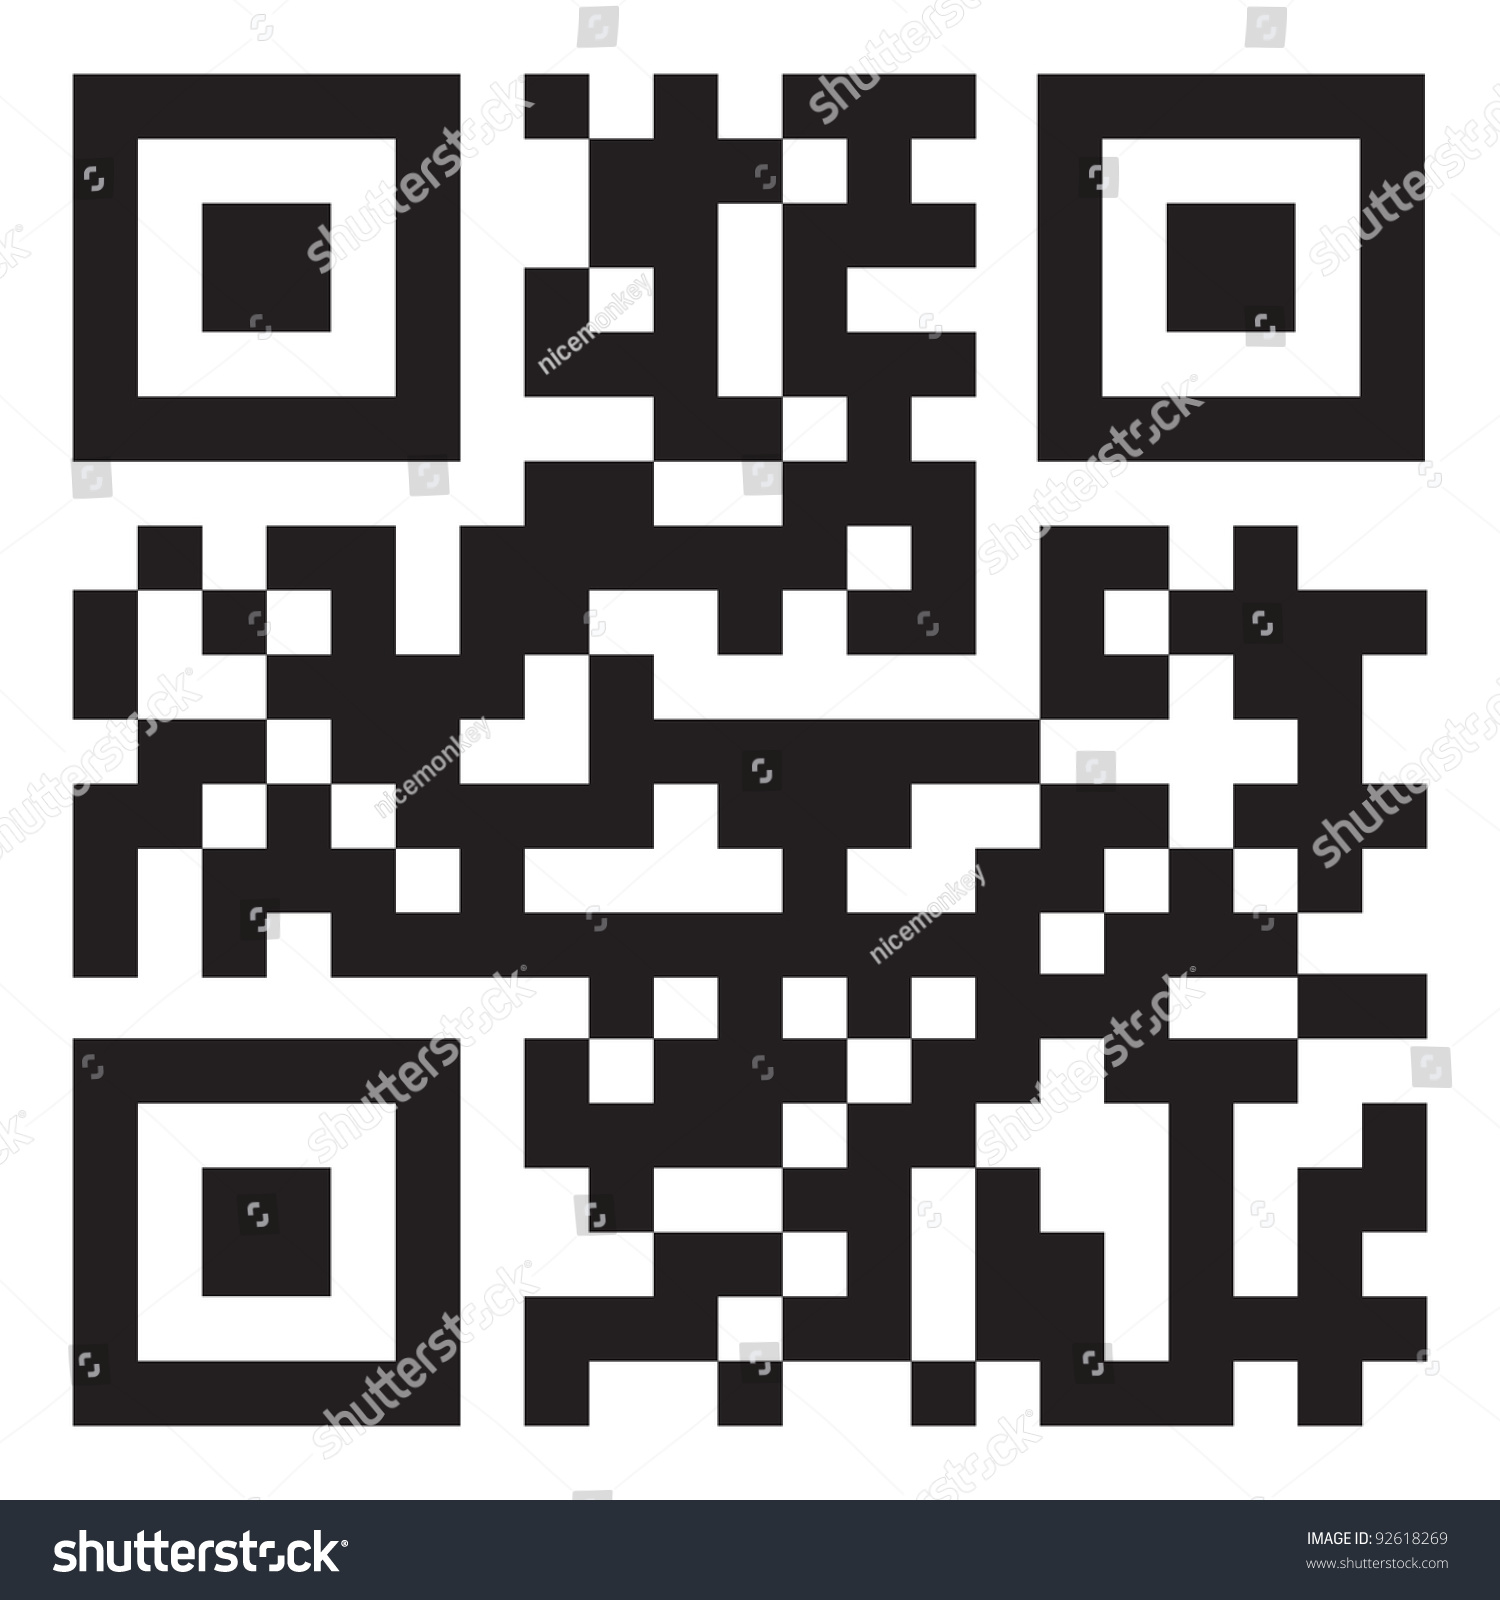 Sample Qr Code Ready To Scan With Smart Phone Stock Vector ...
